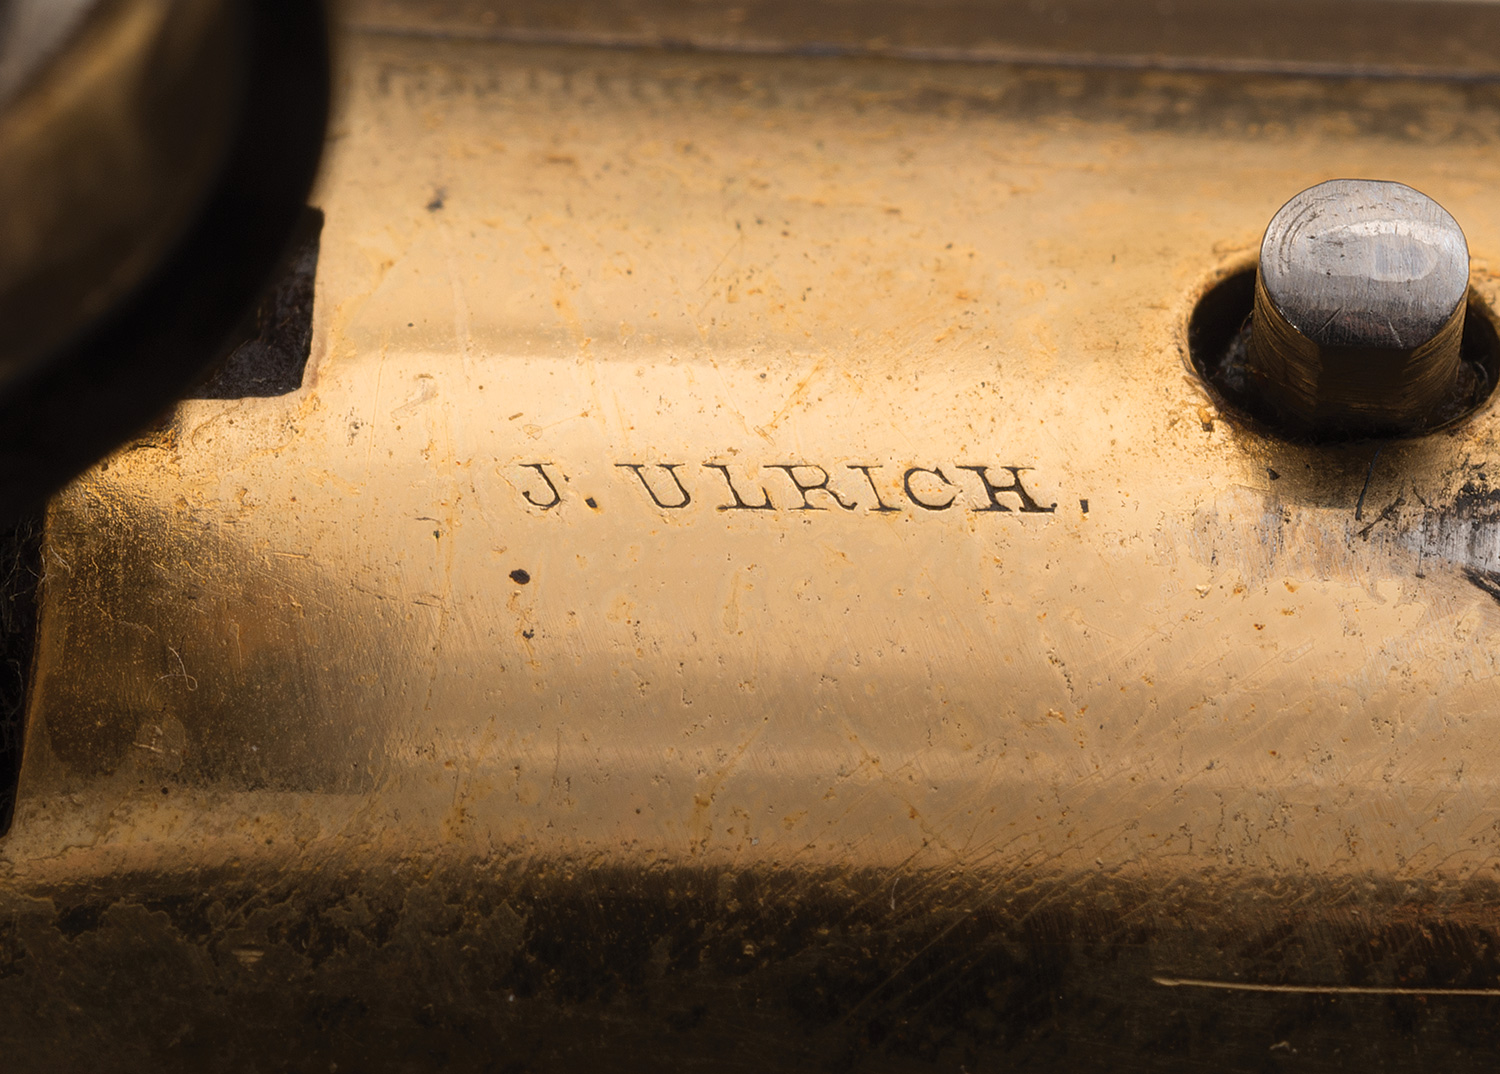 This presentation rifle is signed by master engraver John Ulrich.